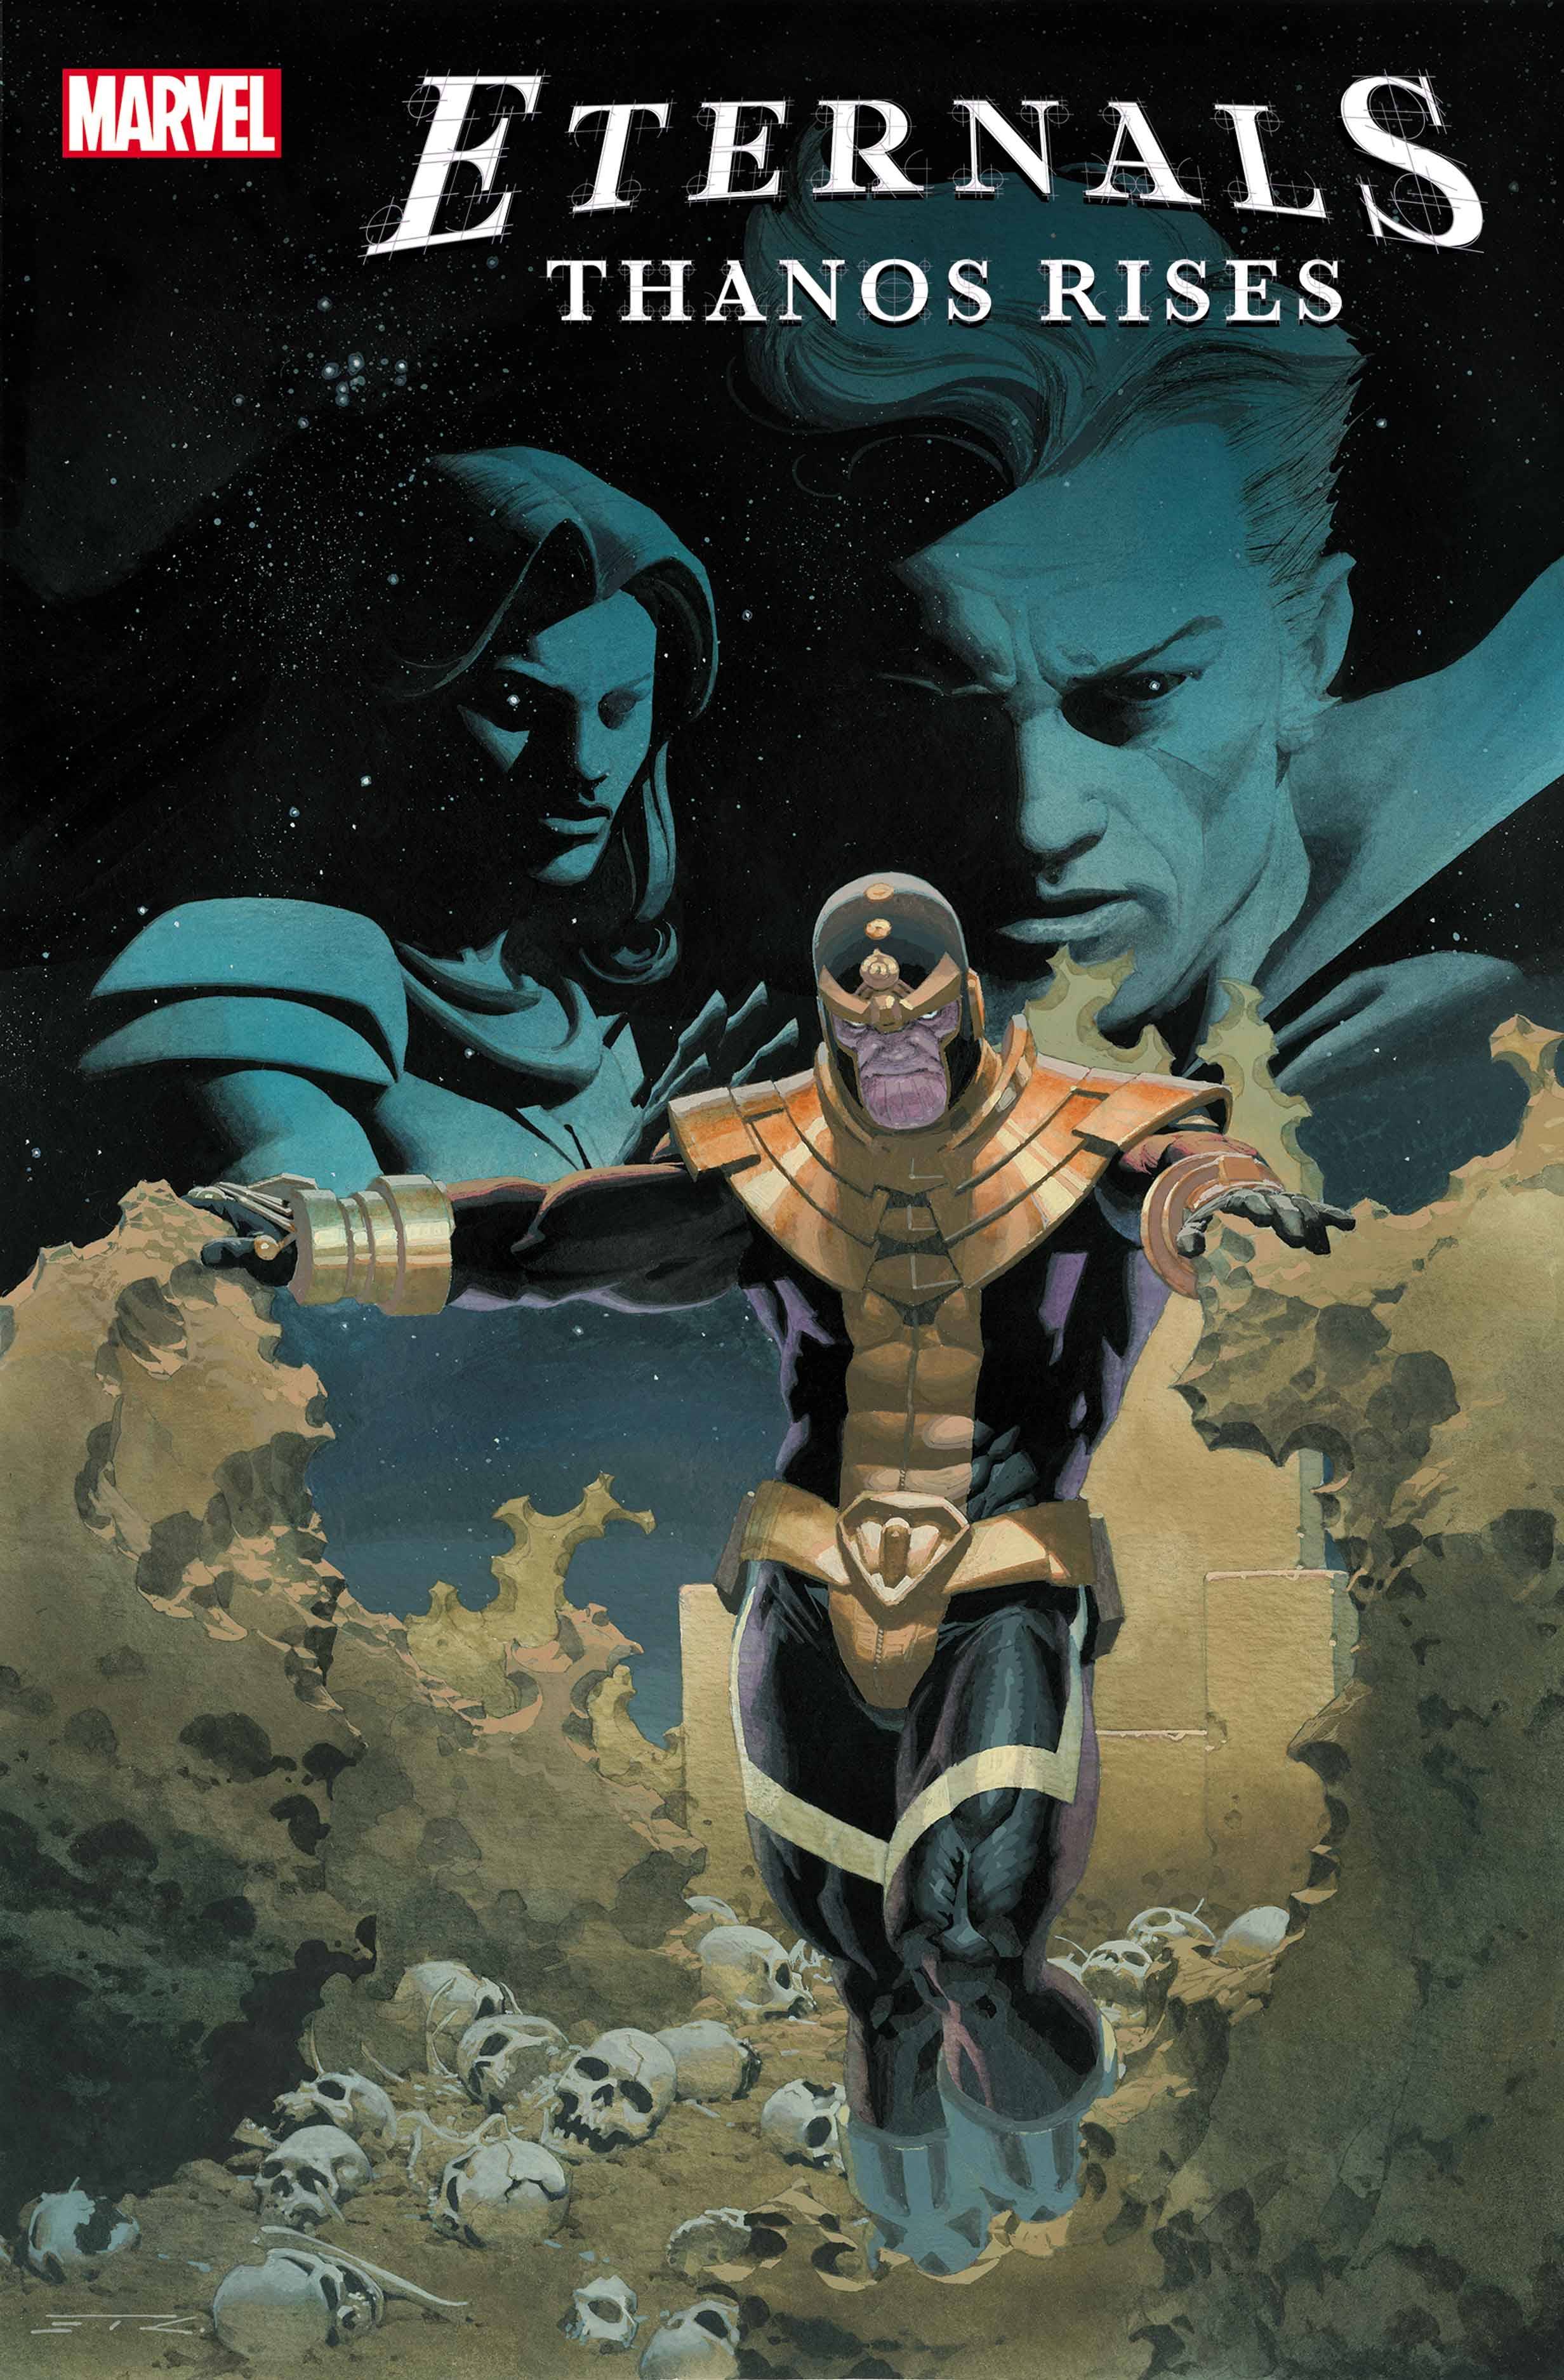 Photo of Eternals Thanos Rises Issue 1 comic sold by Stronghold Collectibles